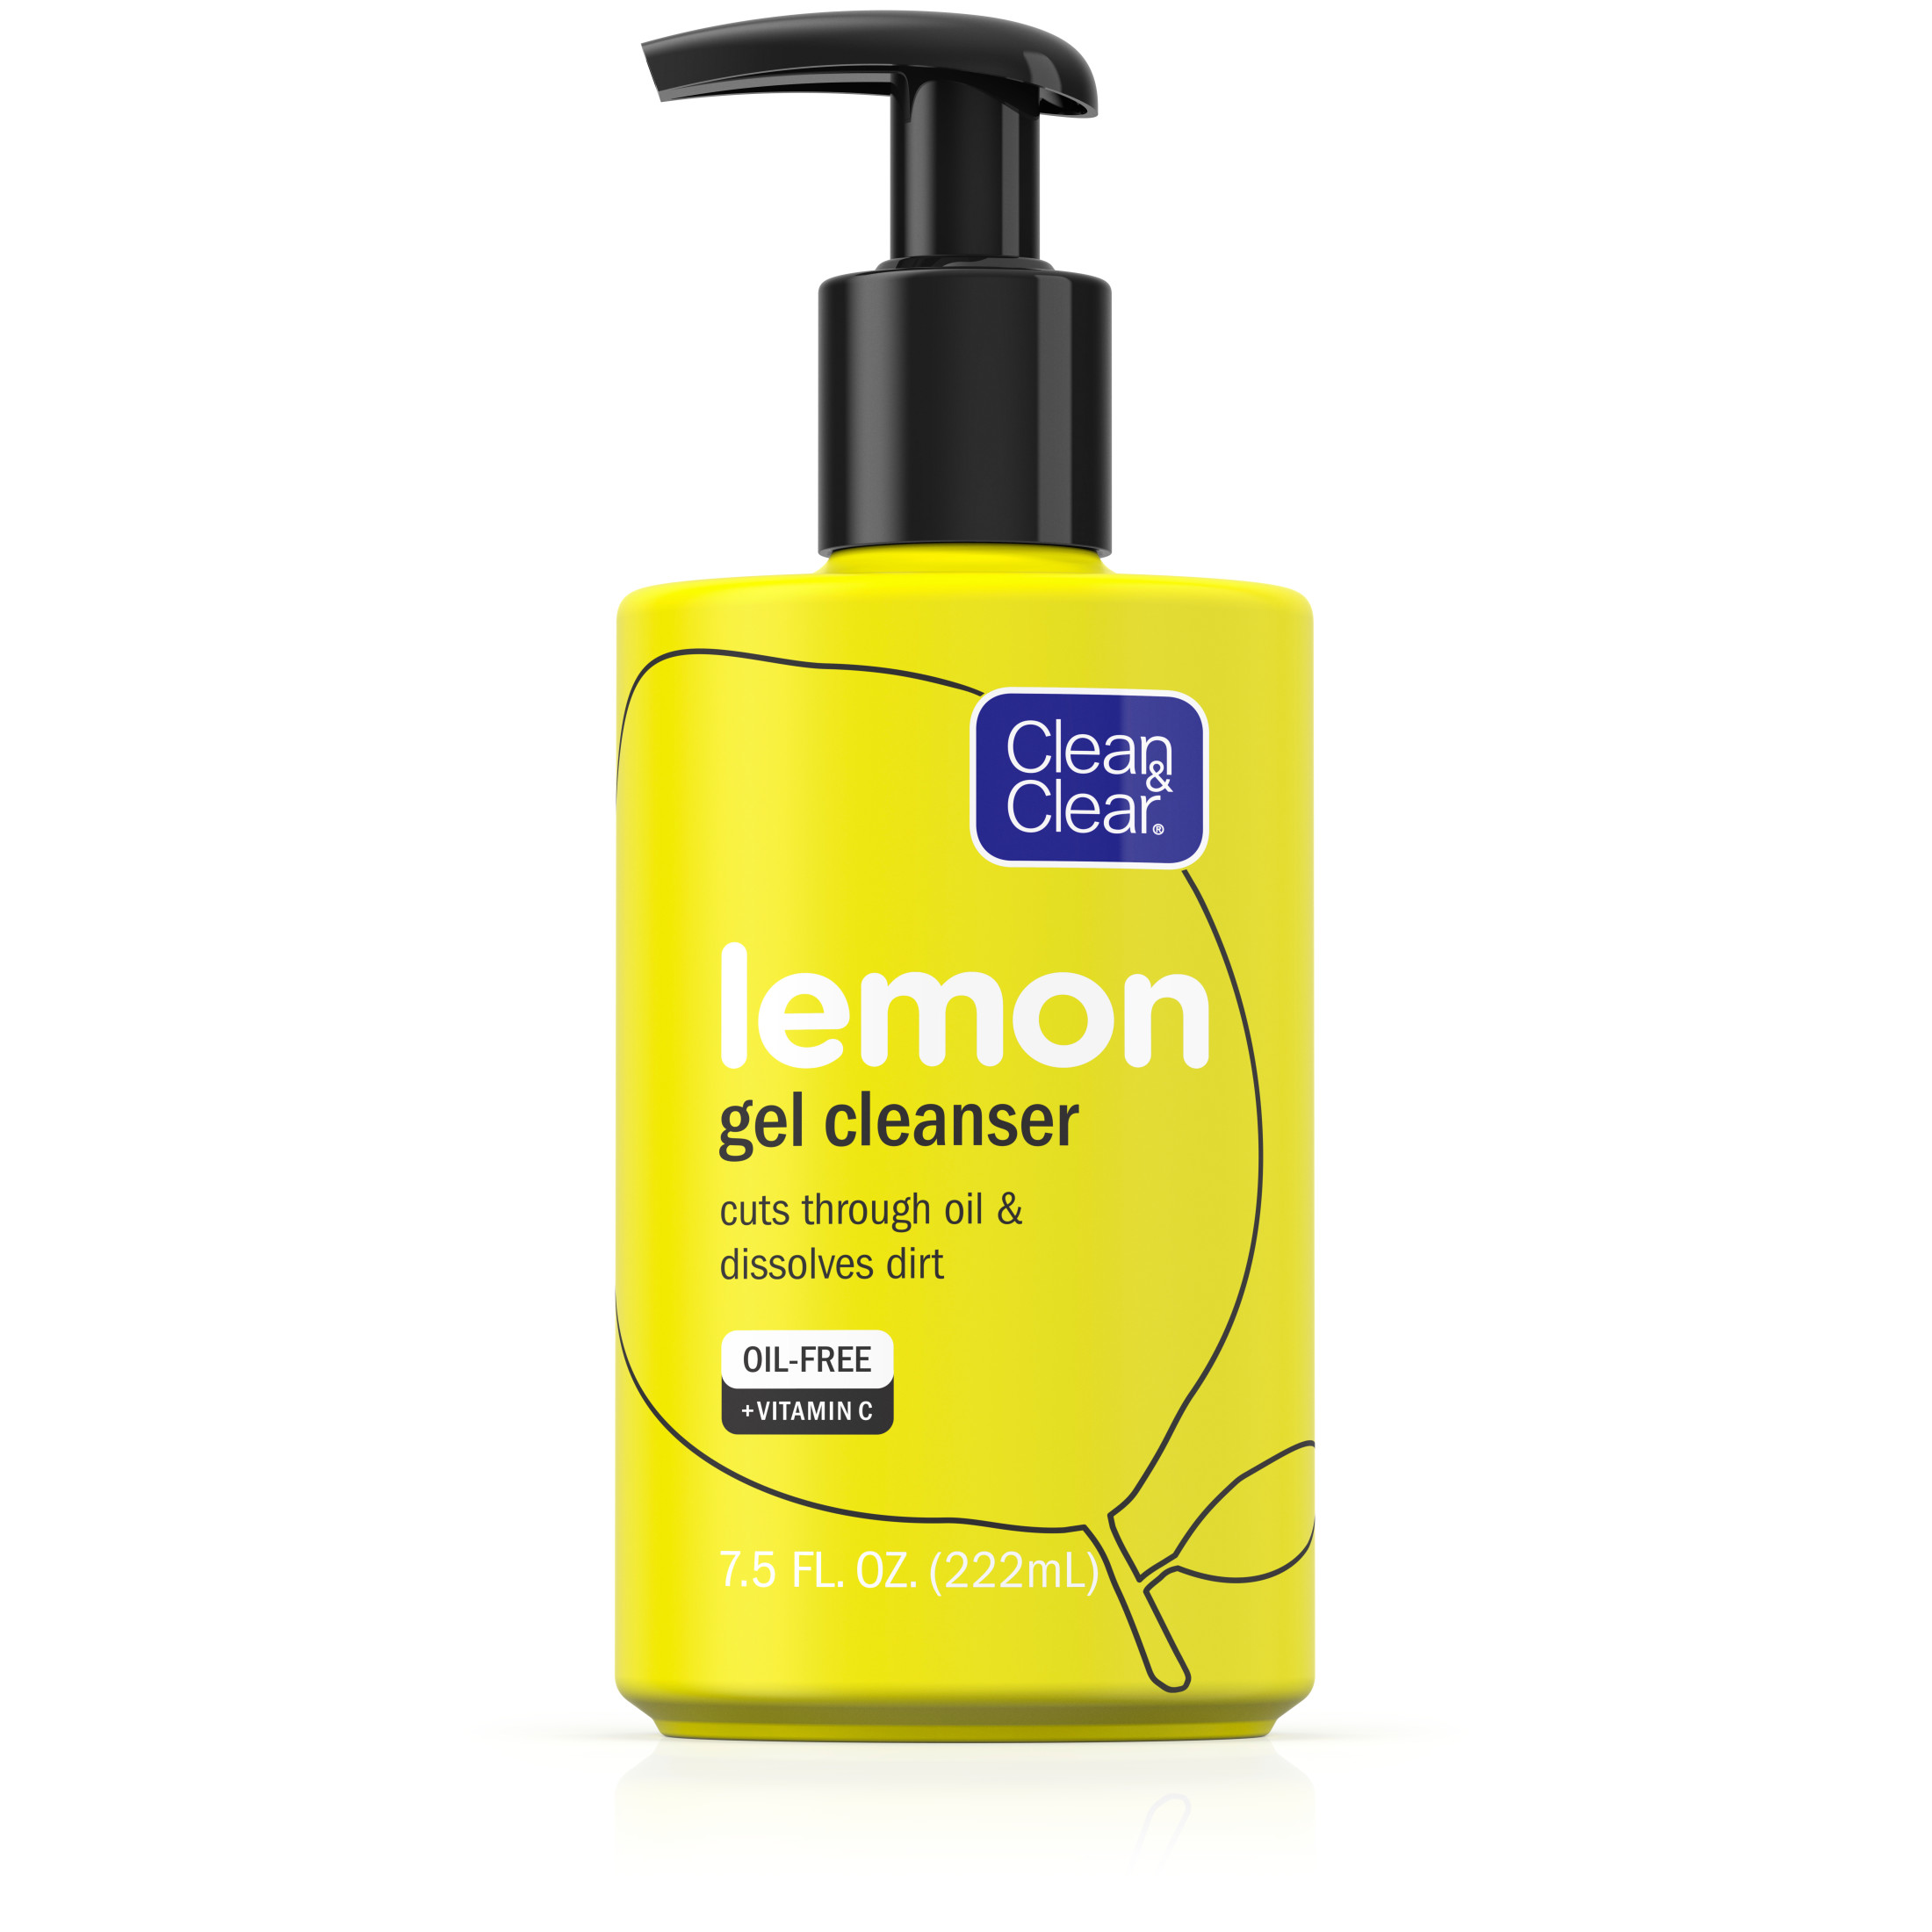 Clean & Clear Lemon Gel Facial Cleanser with Vitamin C, 7.5 fl. oz - image 1 of 11